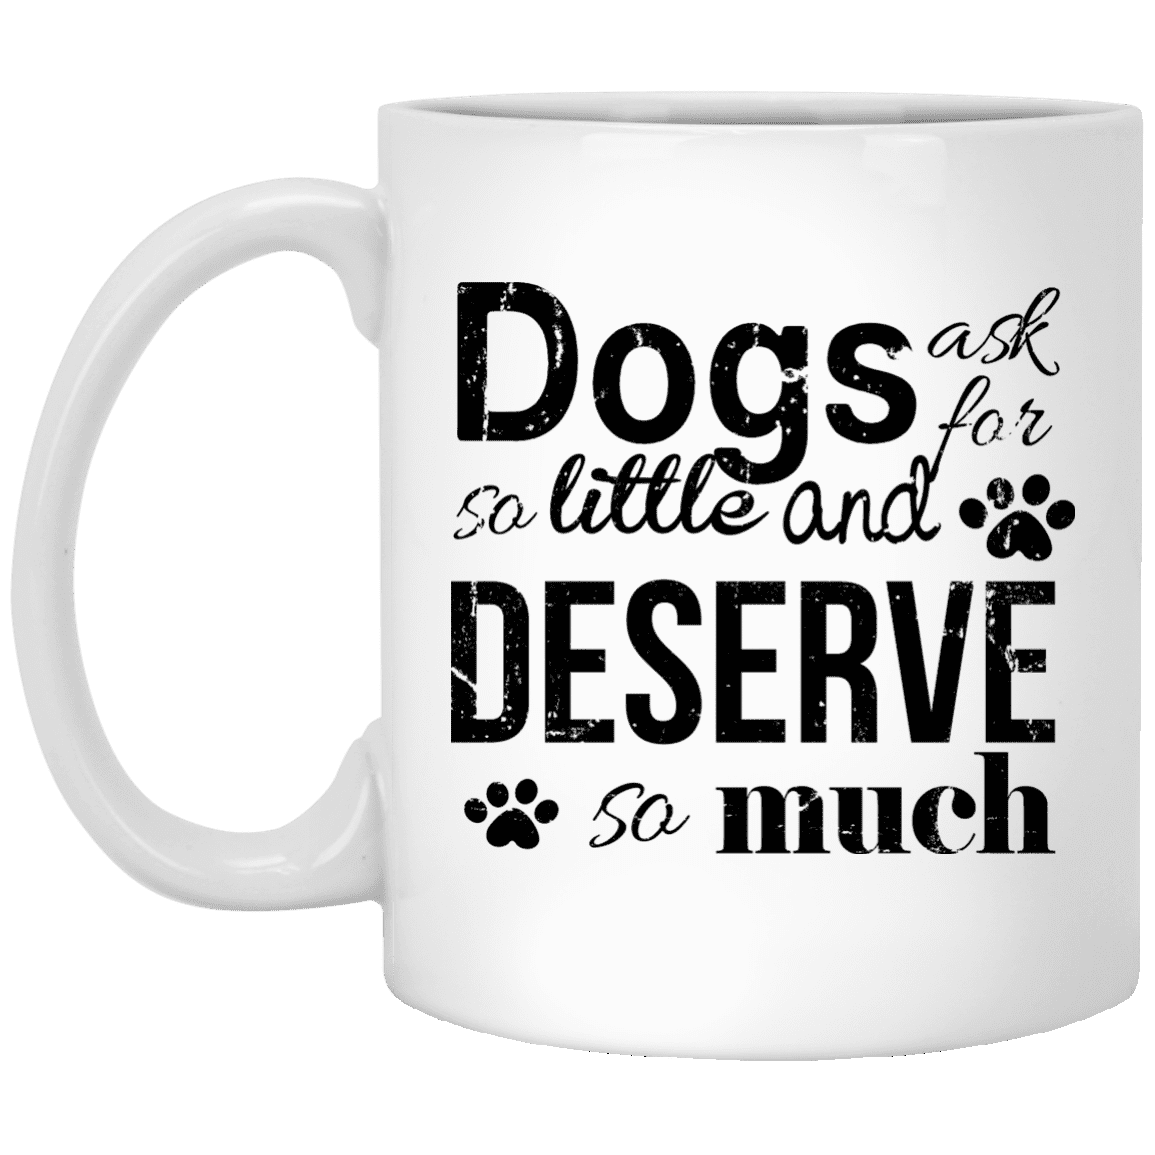 Dogs Deserve So Much - Mugs.